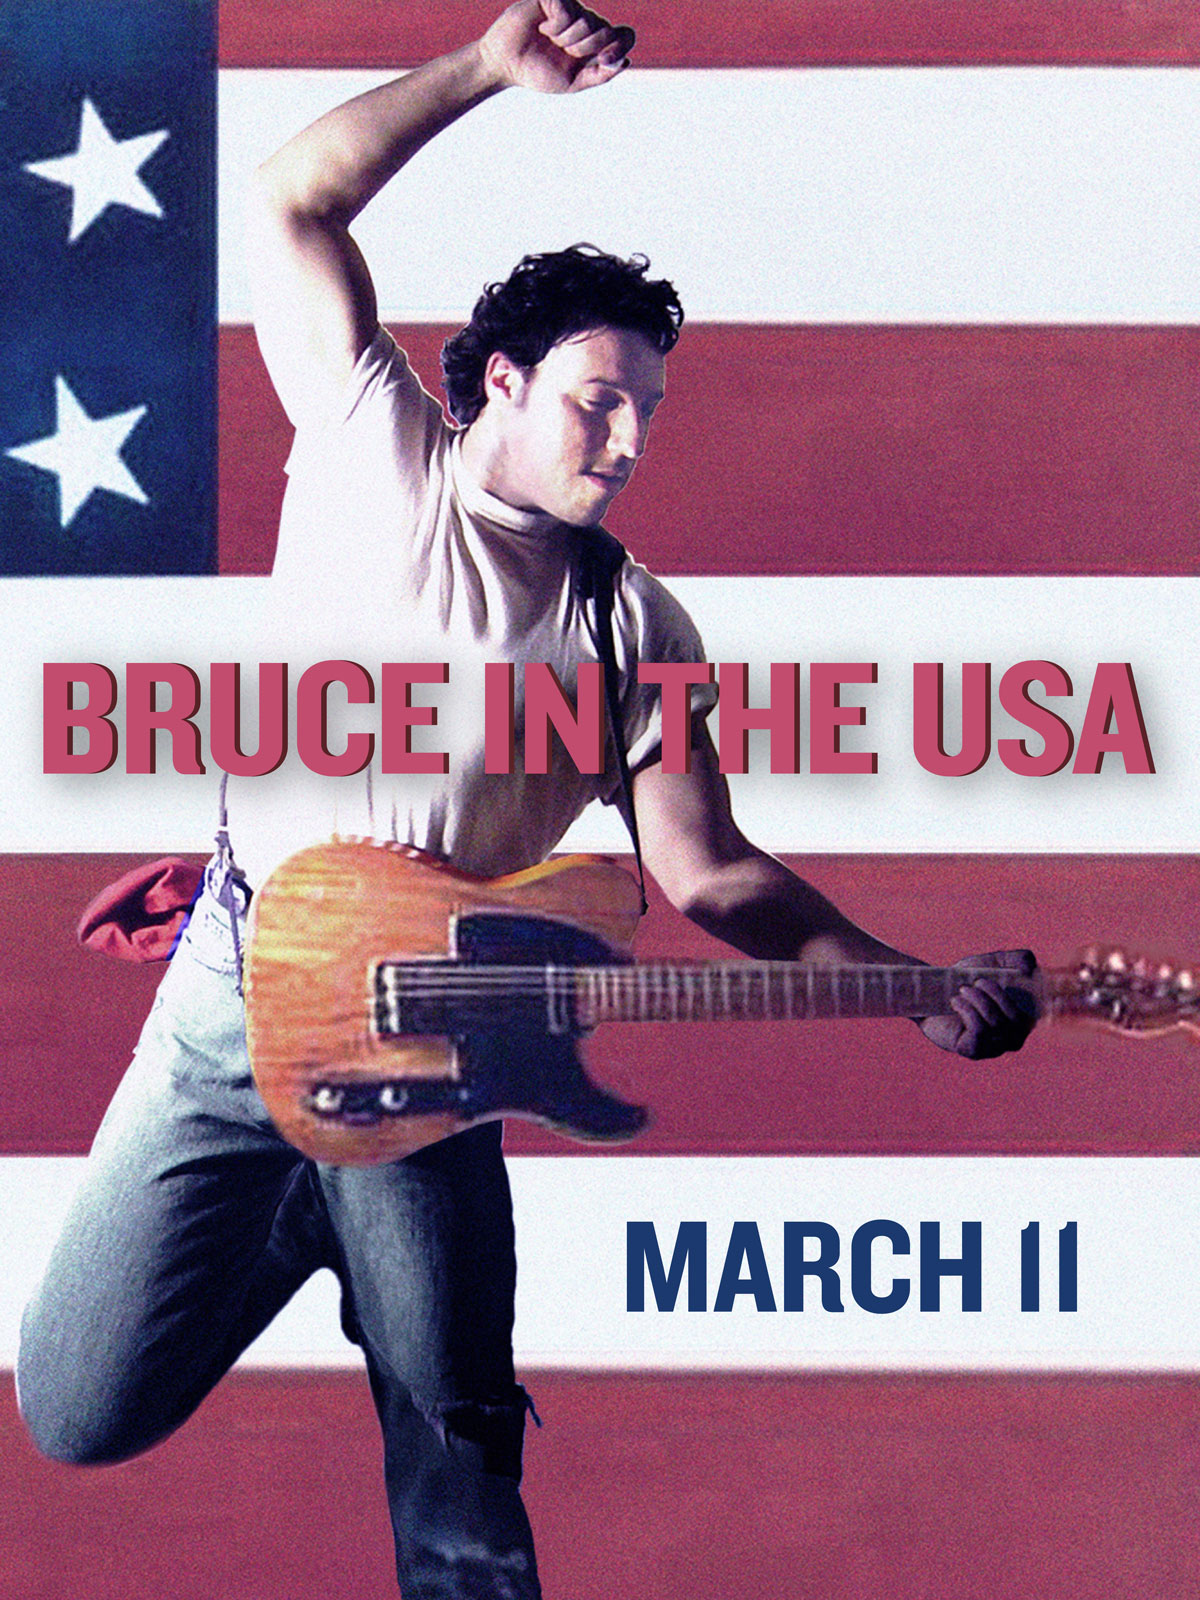 Bruce in the USA concert